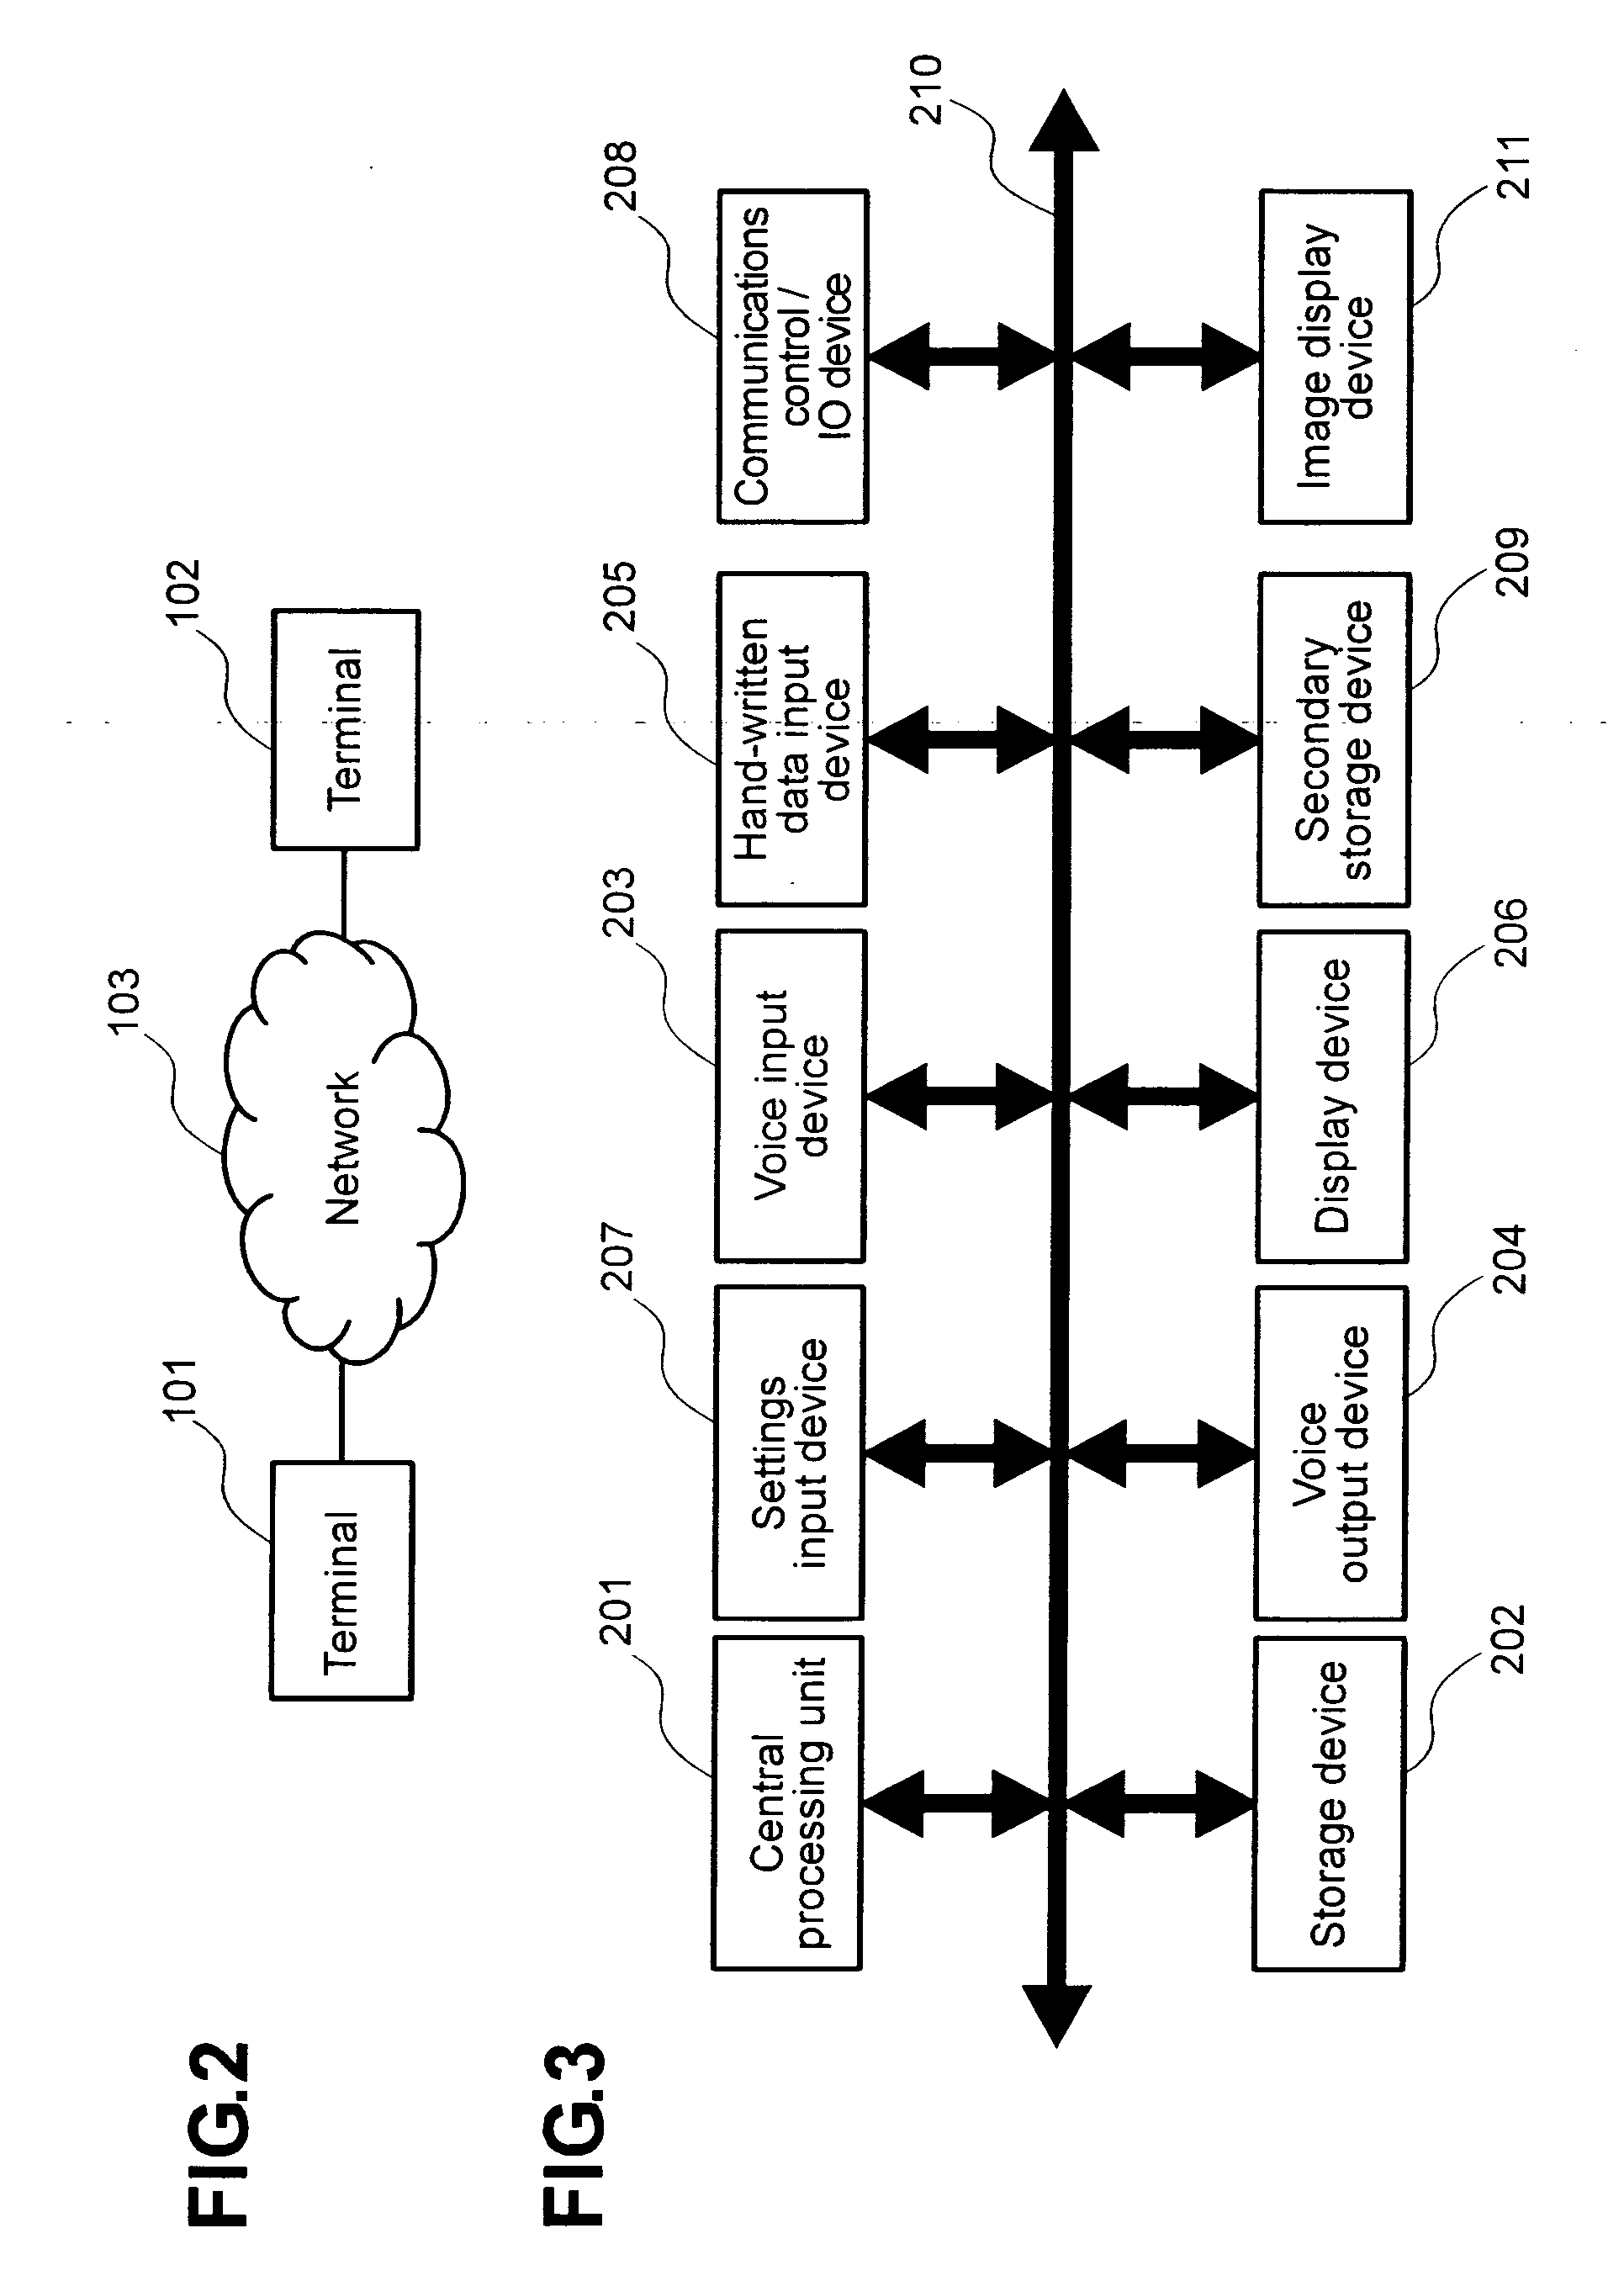 Communications system and method